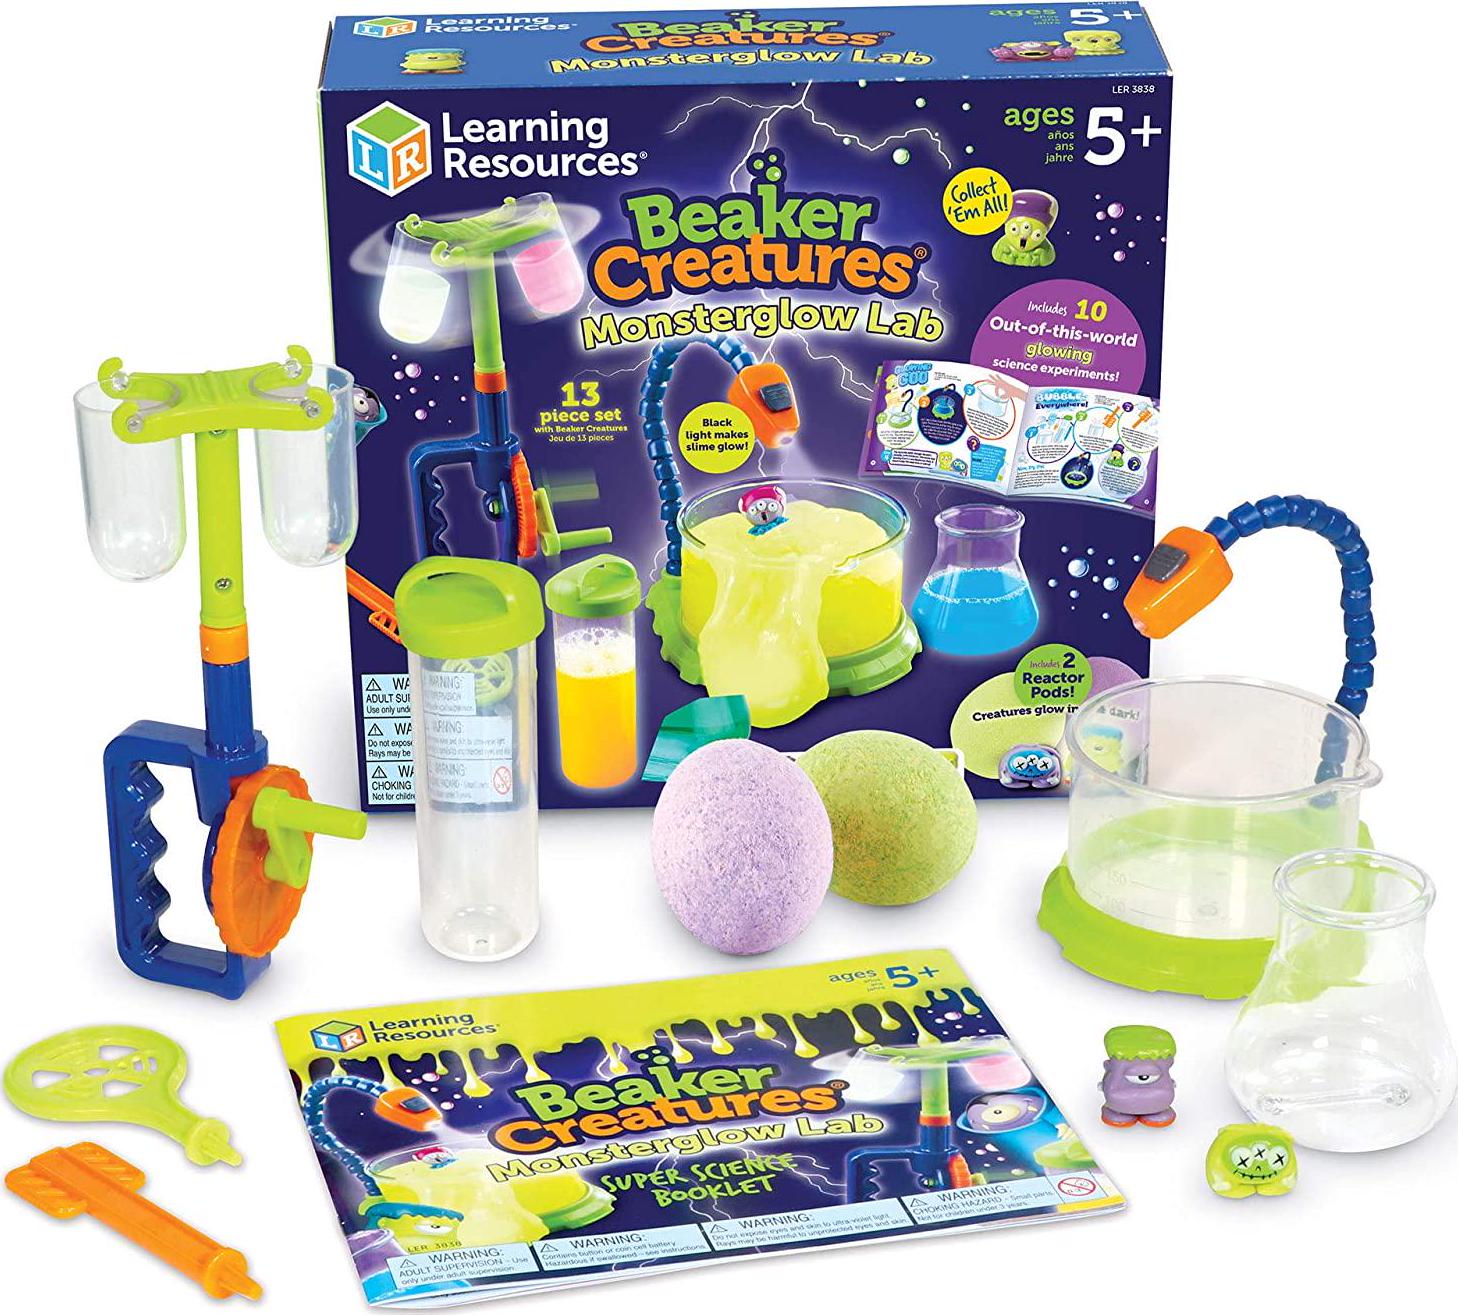 Learning Resources, Learning Resources Beaker Creatures Monsterglow Lab, Science Exploration, Slime, STEM, Homeschool, Ages 5+